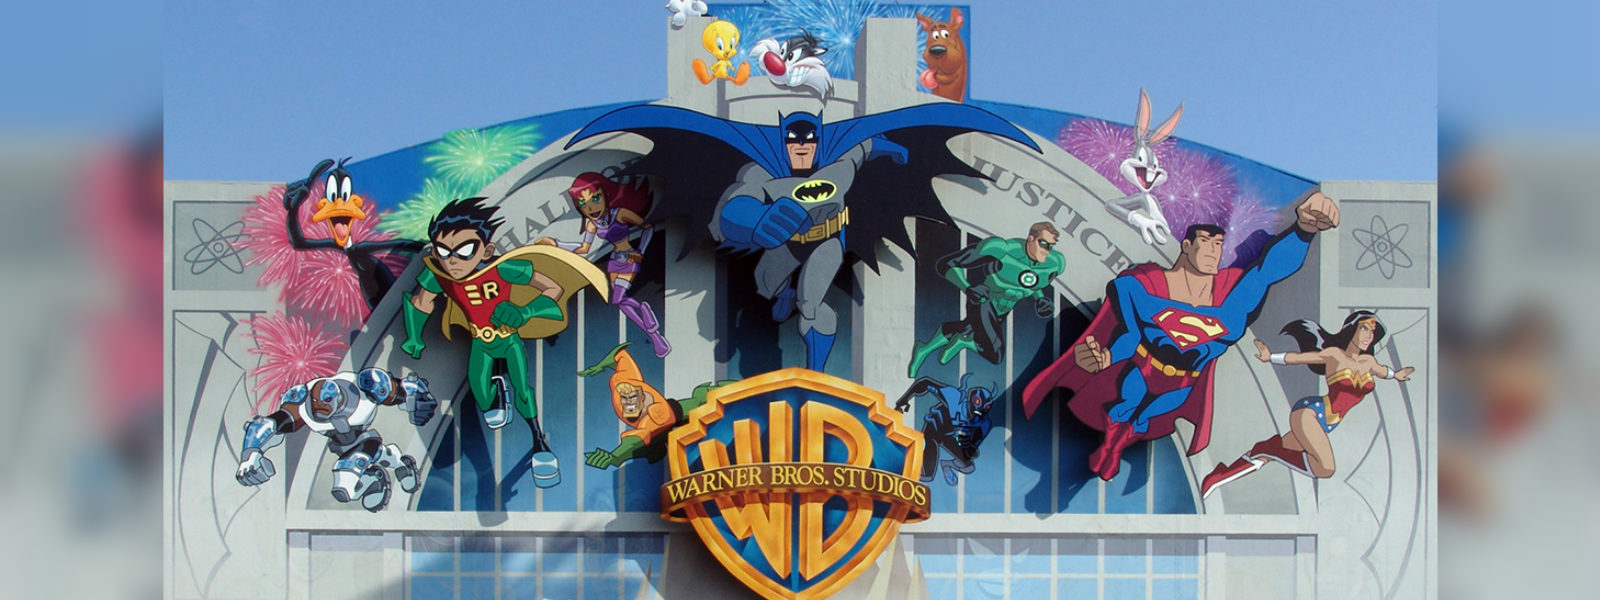 Stars & trailers as WB take over Comic-con